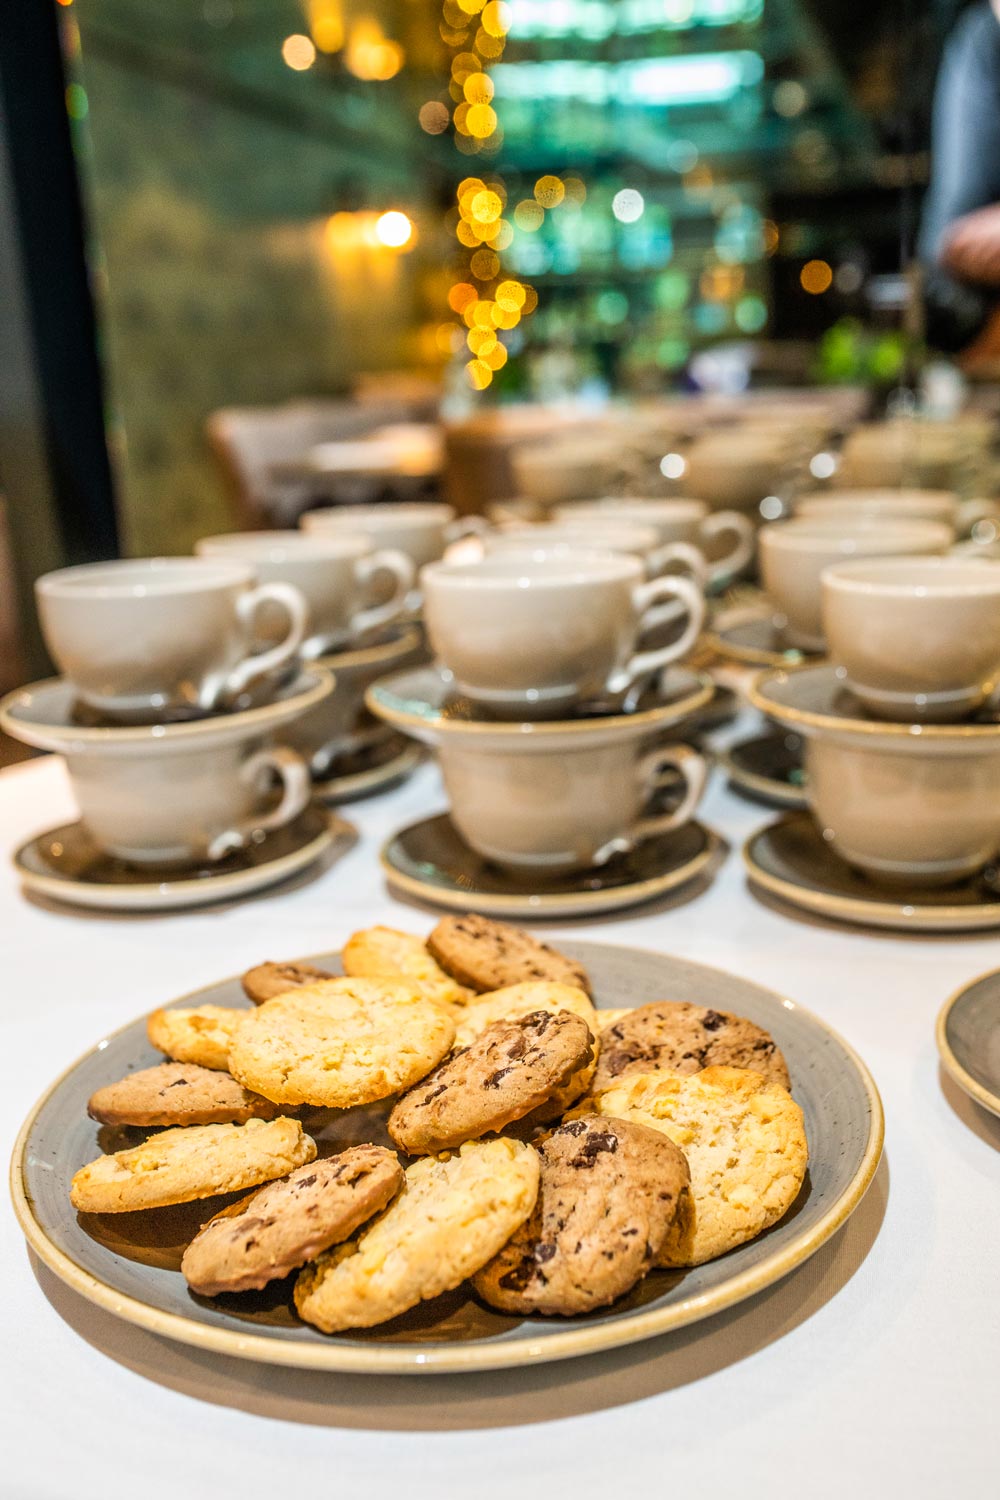 Cookies on a table with coffee mugs